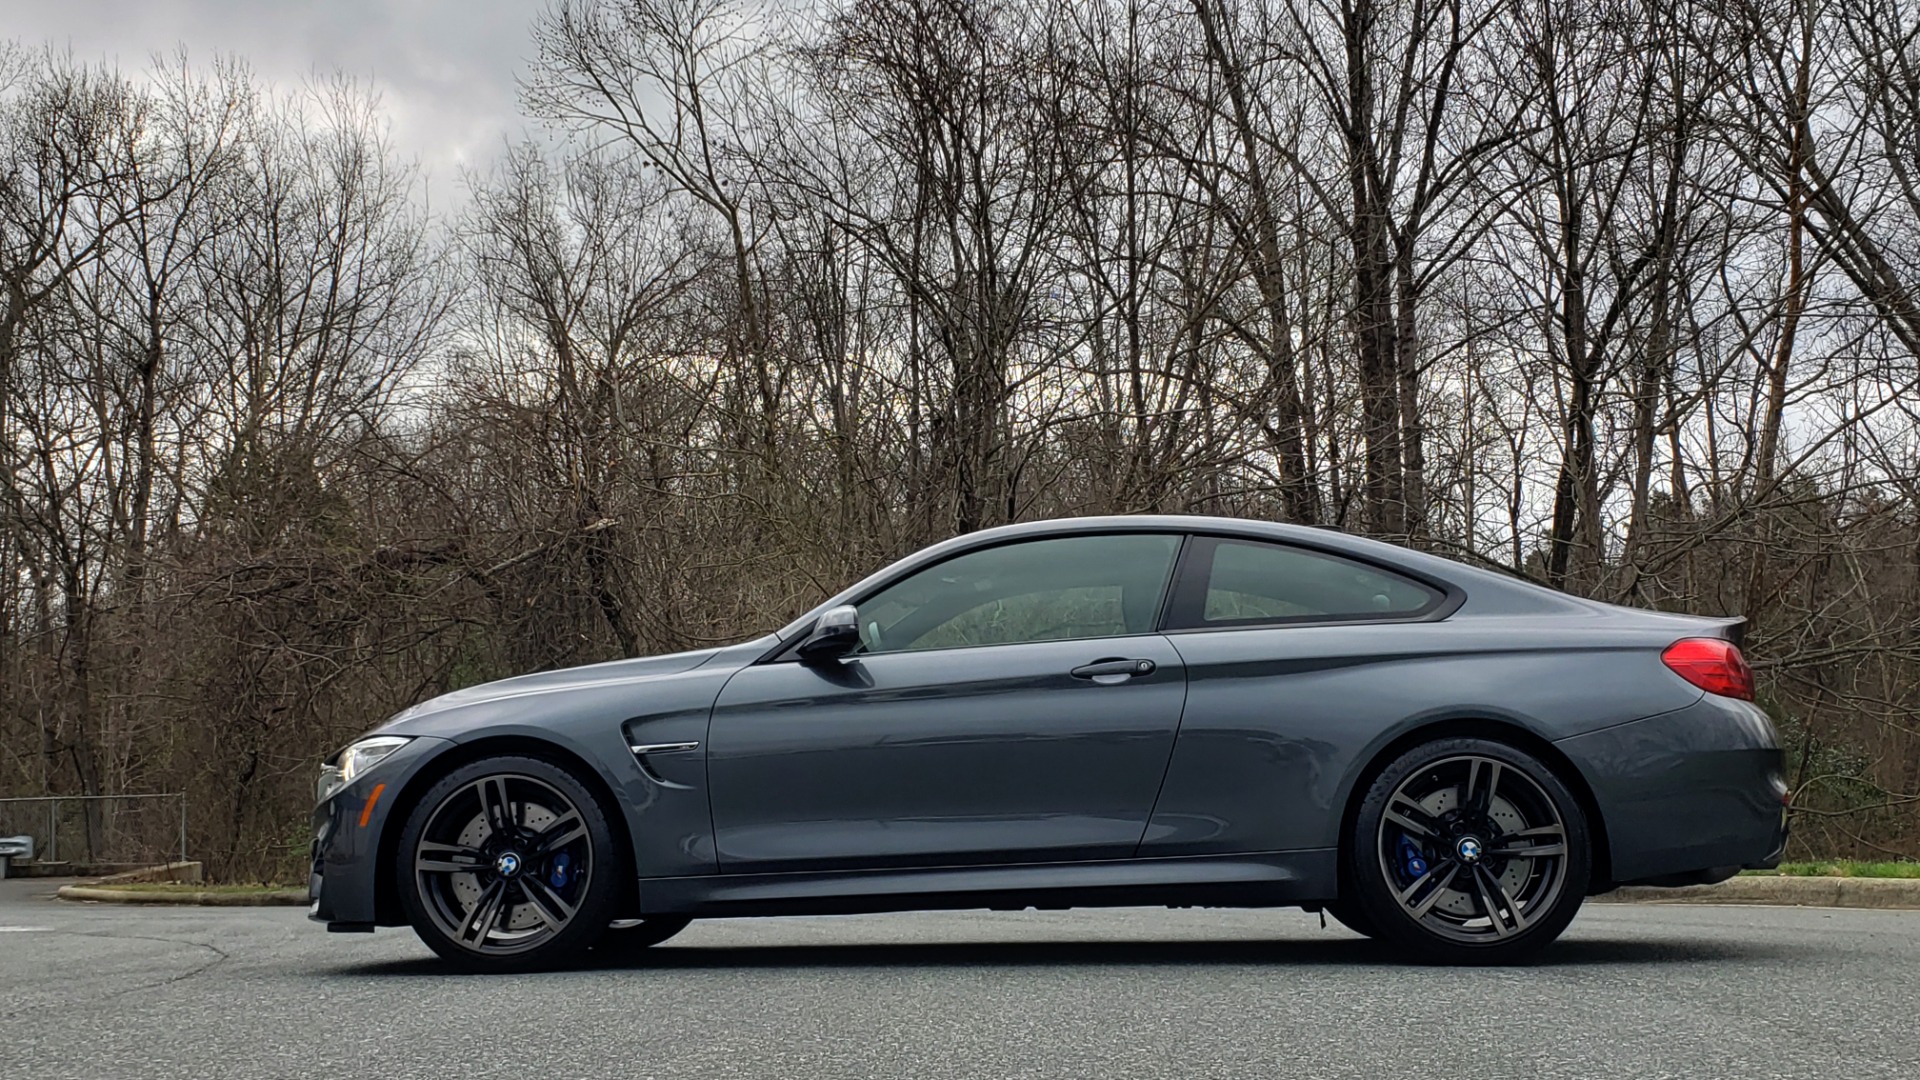 Used 2017 BMW M4 COUPE / 6-SPD MAN / NAV / CF ROOF / HTD STS for sale Sold at Formula Imports in Charlotte NC 28227 3